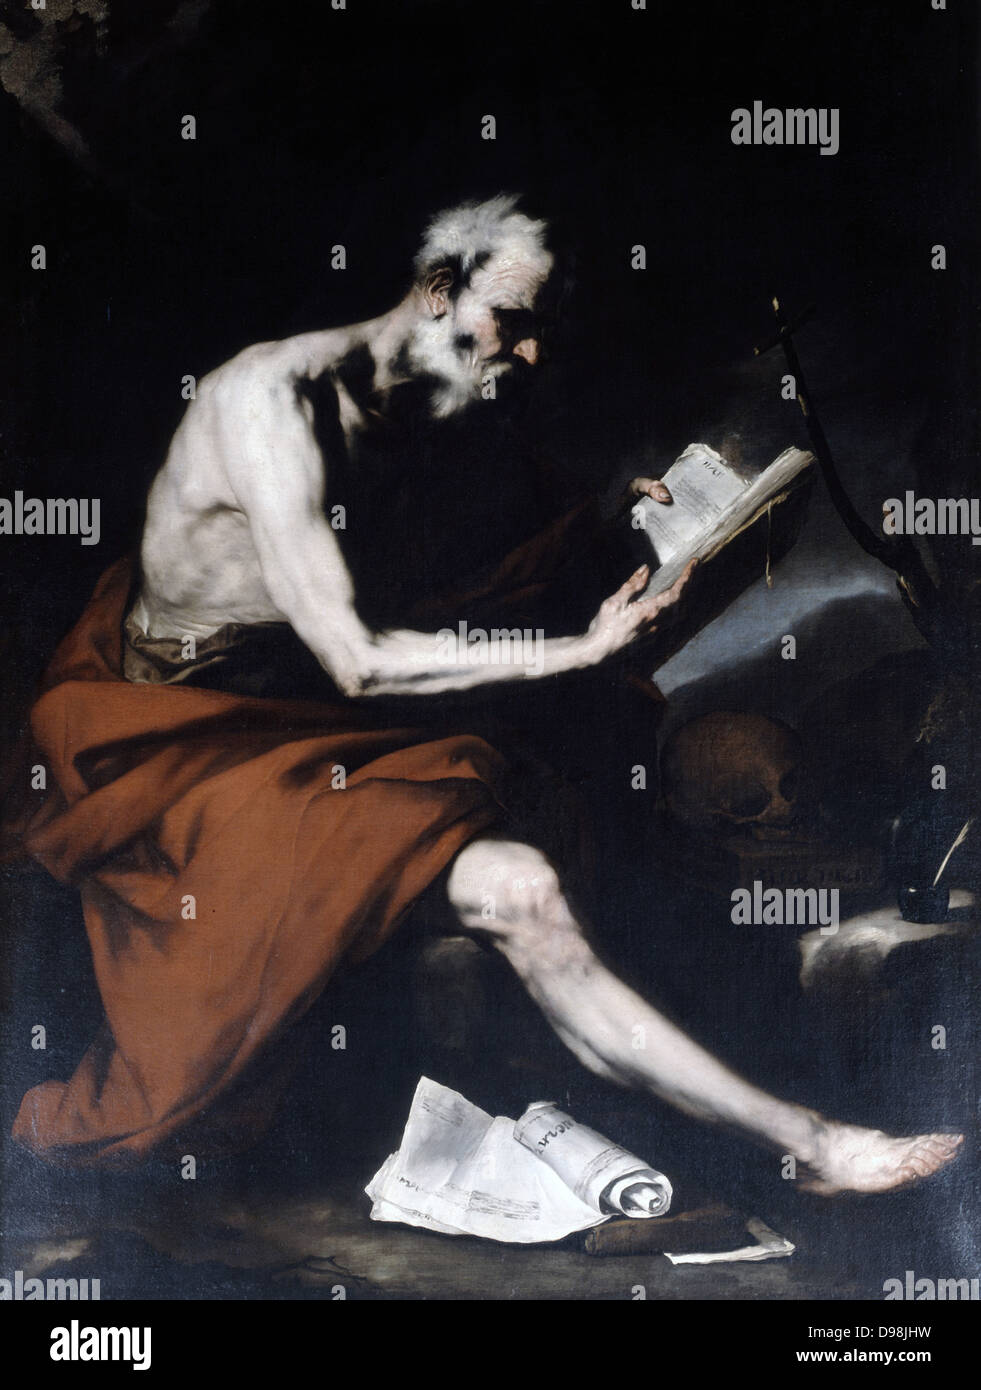 St Jerome Reading', oil on canvas by a follower of Jusepe de Ribera (1591-1652) Spanish Tenebrist painter. St Jerome (c340-420) a father of Western Christian Church and compiler of the Vulgate. Human skull, a memento mori, rests on pile of books. Stock Photo